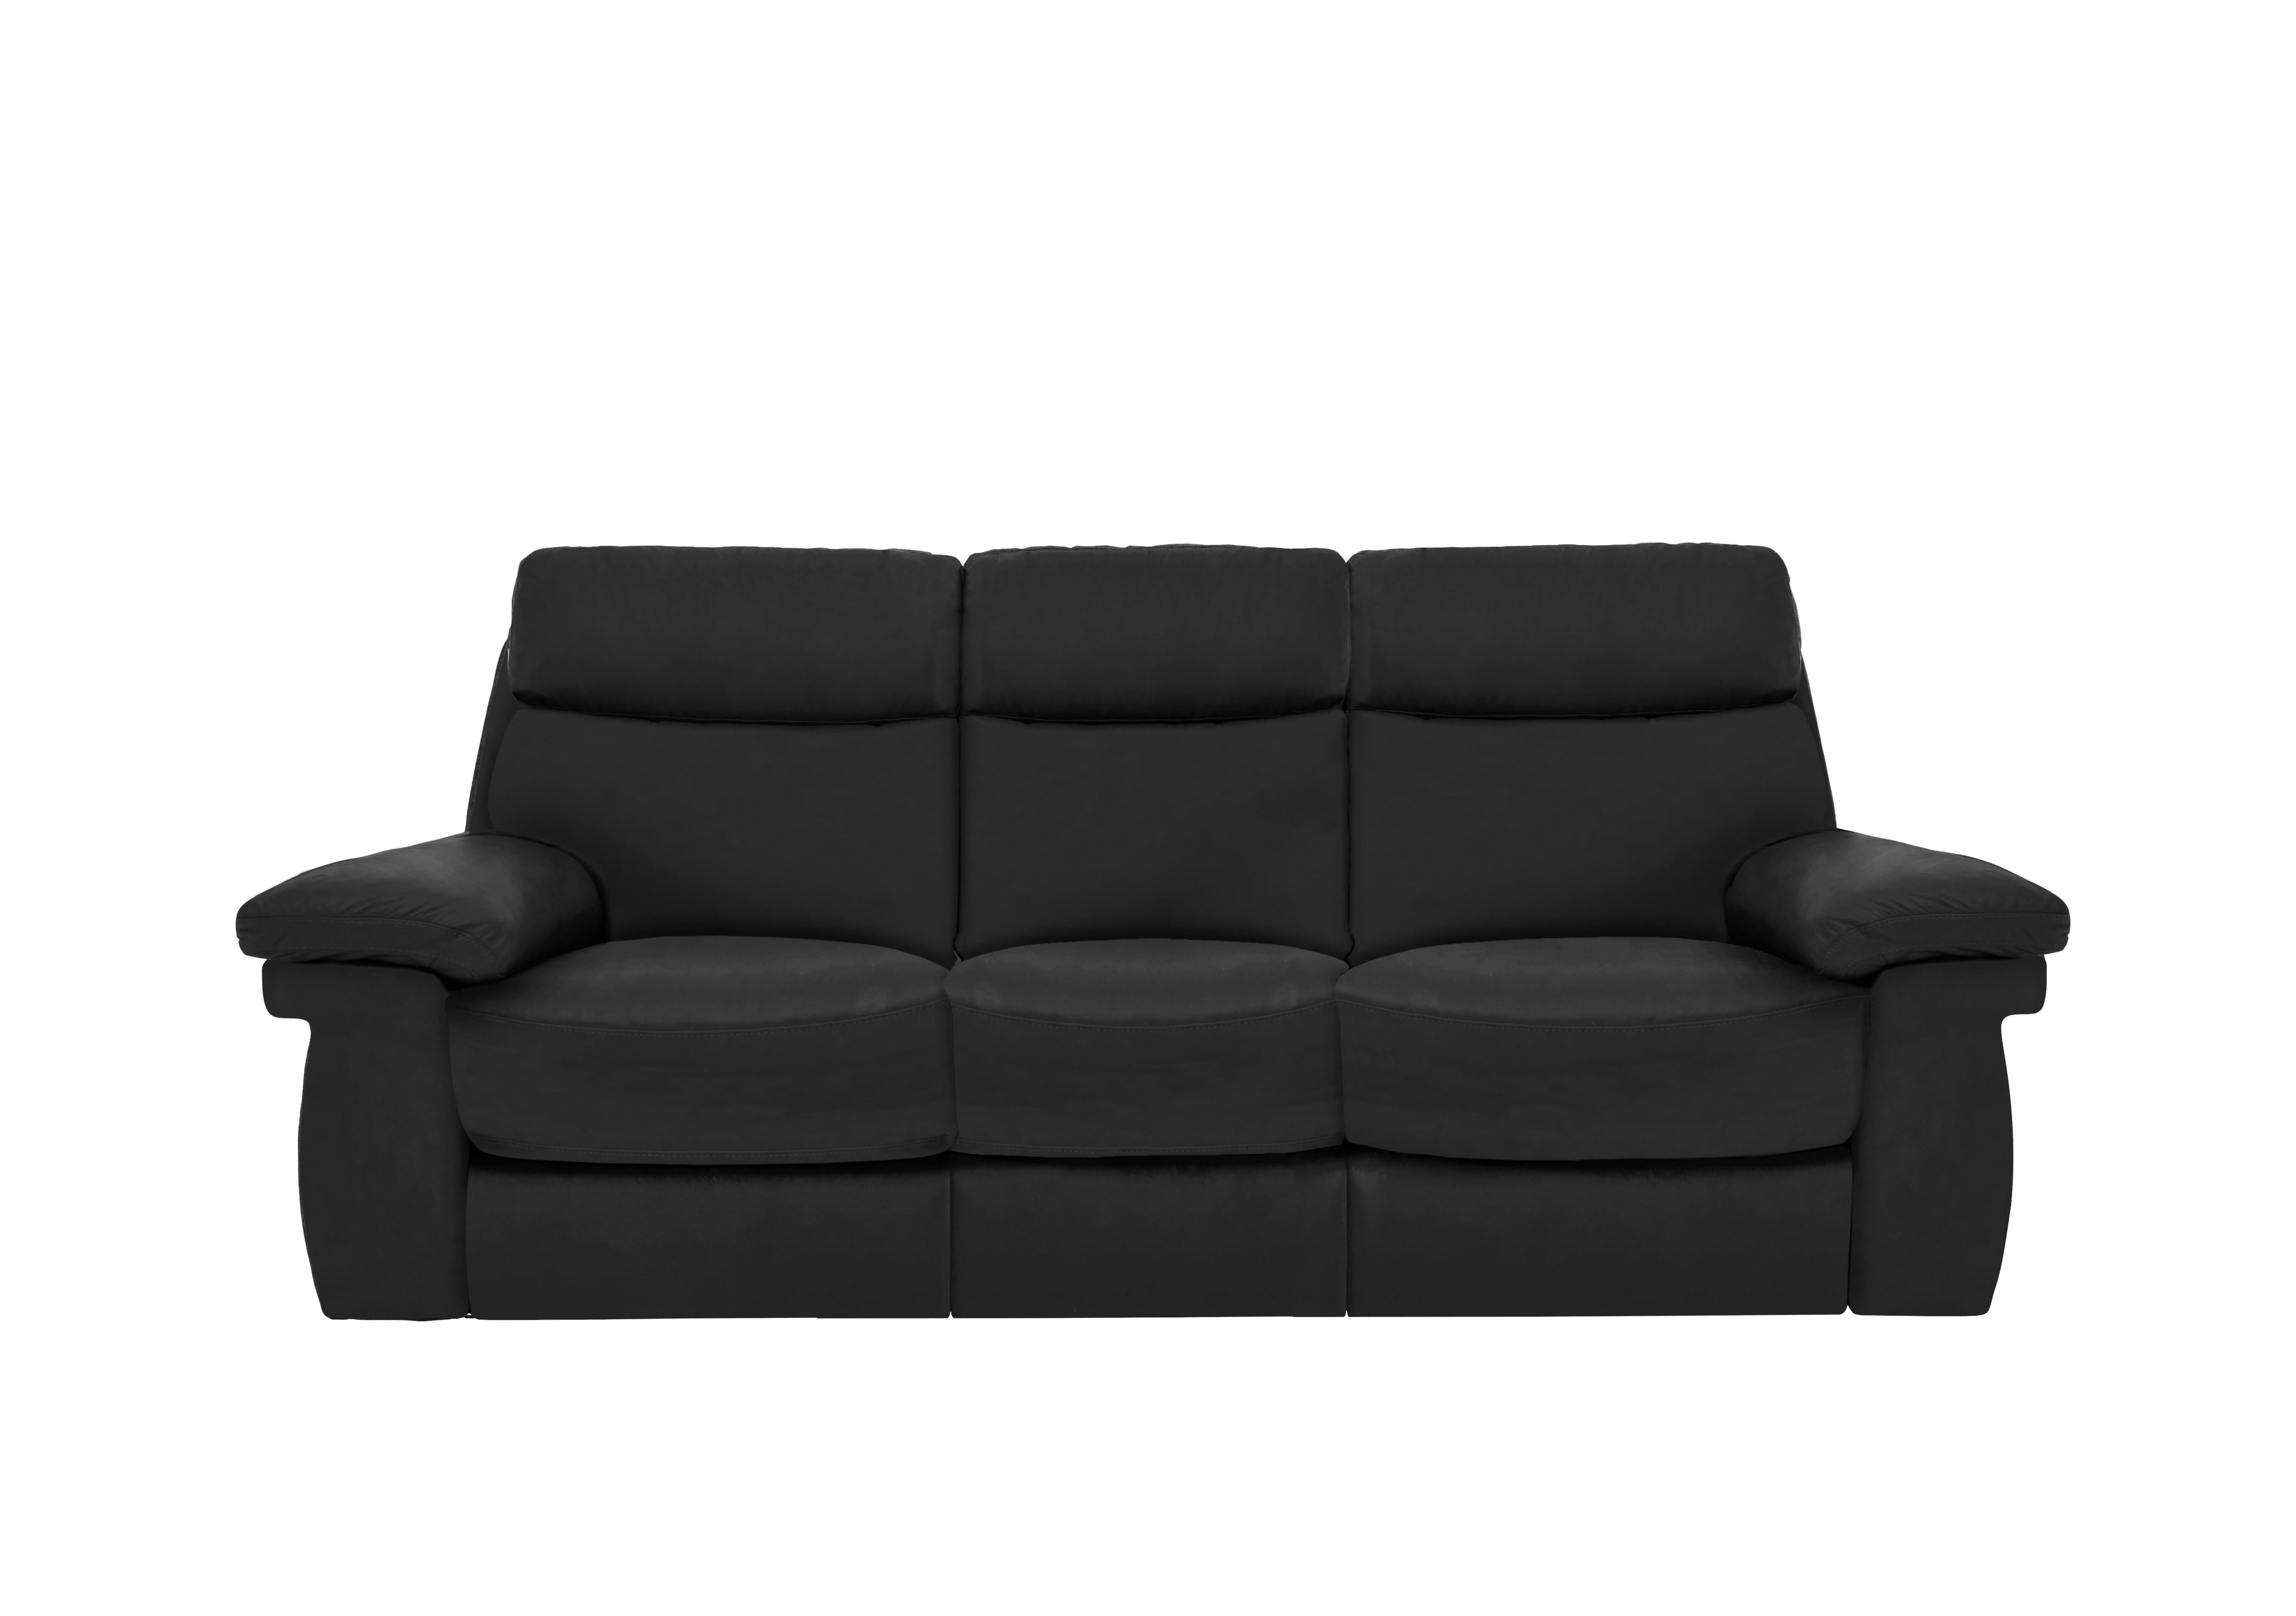 Serene 3 Seater Leather Power Recliner Sofa with Drop Down Table and Power Headrests in Bx-023c Black on Furniture Village